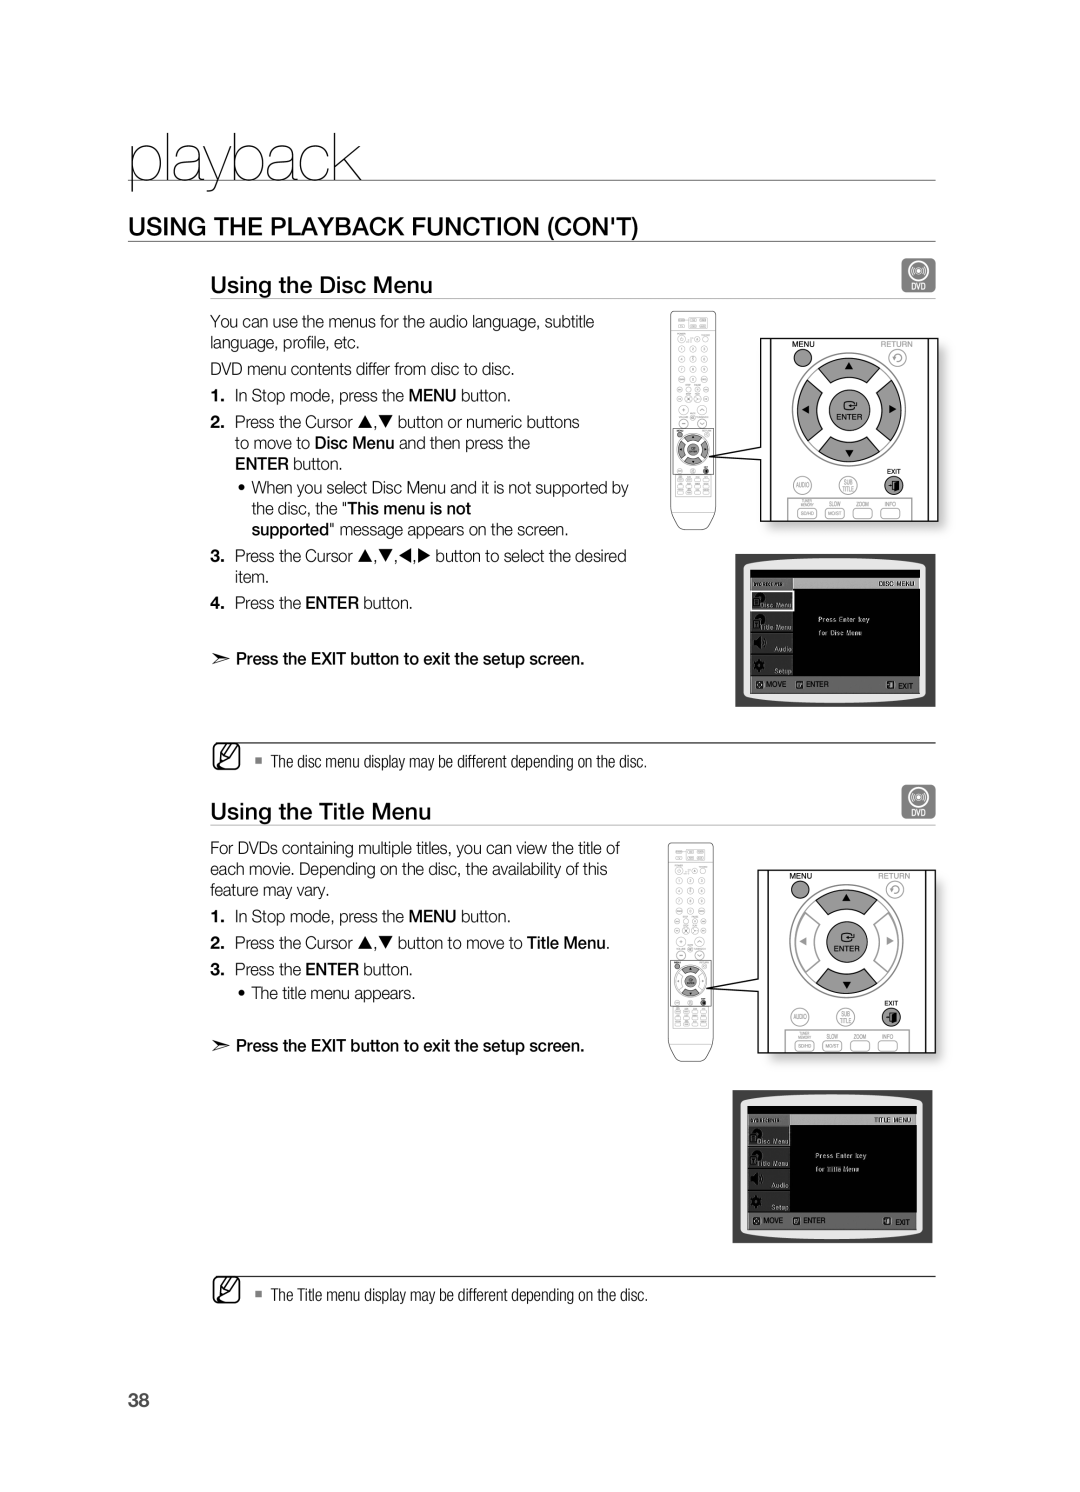 Sony HT-X810 user manual Using the Disc Menu, Using the Title Menu, playback, USING THE PlAYBACK FUNCTION CONT 